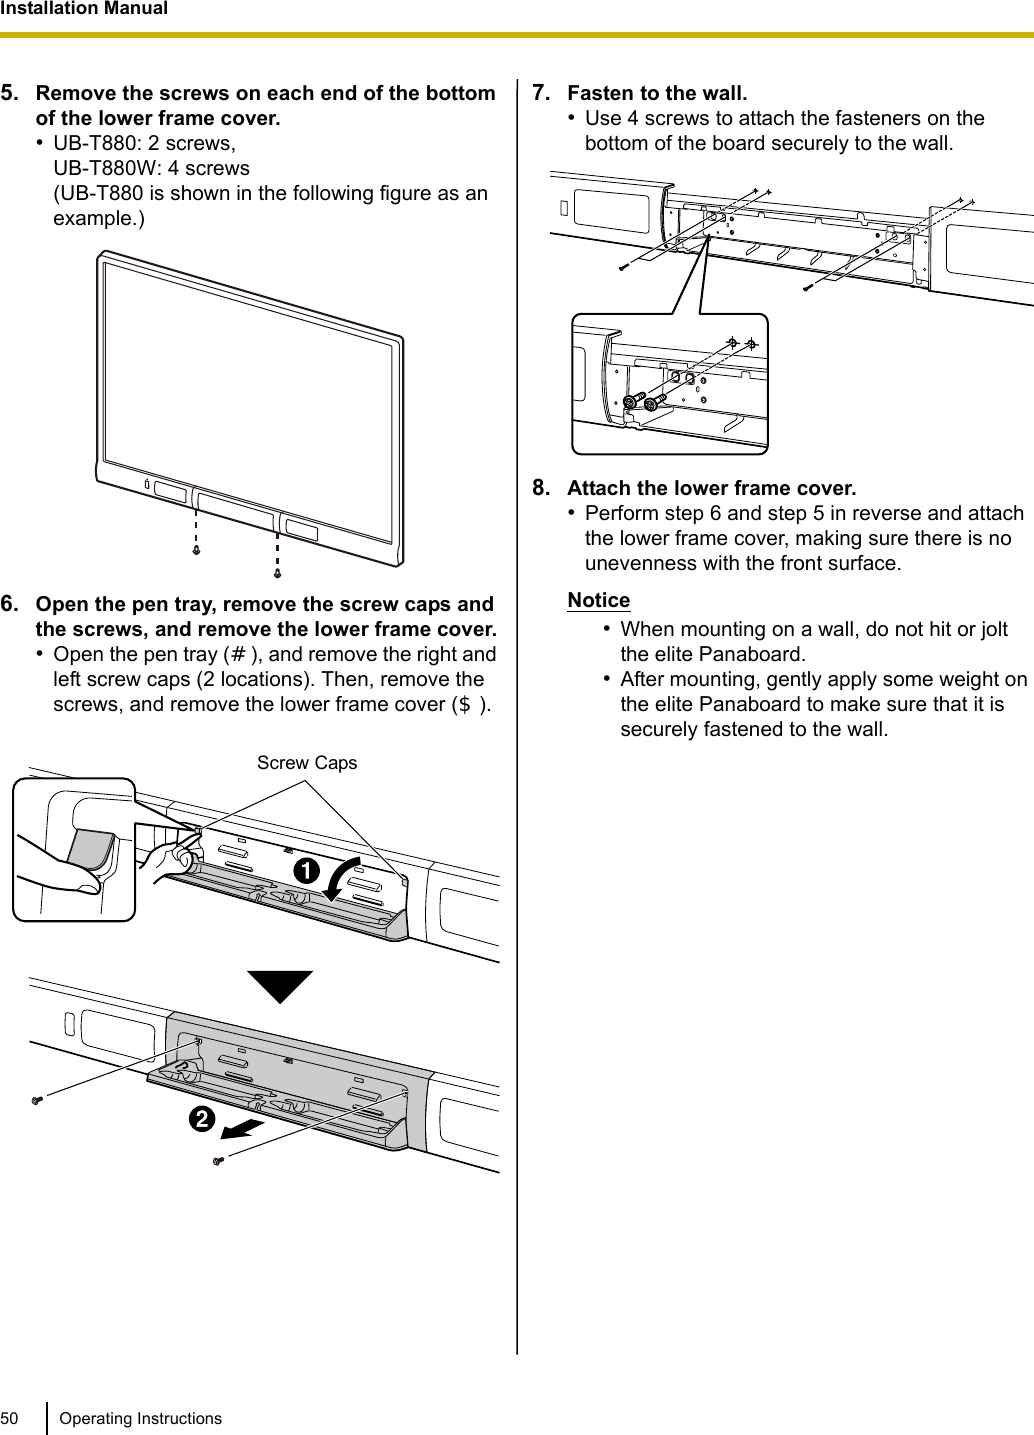 Installation Manual50 Operating Instructions5. Remove the screws on each end of the bottom of the lower frame cover.•UB-T880: 2 screws, UB-T880W: 4 screws(UB-T880 is shown in the following figure as an example.)6. Open the pen tray, remove the screw caps and the screws, and remove the lower frame cover.•Open the pen tray (), and remove the right and left screw caps (2 locations). Then, remove the screws, and remove the lower frame cover ().7. Fasten to the wall.•Use 4 screws to attach the fasteners on the bottom of the board securely to the wall.8. Attach the lower frame cover. •Perform step 6 and step 5 in reverse and attach the lower frame cover, making sure there is no unevenness with the front surface.Notice•When mounting on a wall, do not hit or jolt the elite Panaboard.•After mounting, gently apply some weight on the elite Panaboard to make sure that it is securely fastened to the wall.9. Confirm that the elite Panaboard can operate.•See “Confirming the elite Panaboard Operation” (page 54).Screw Caps